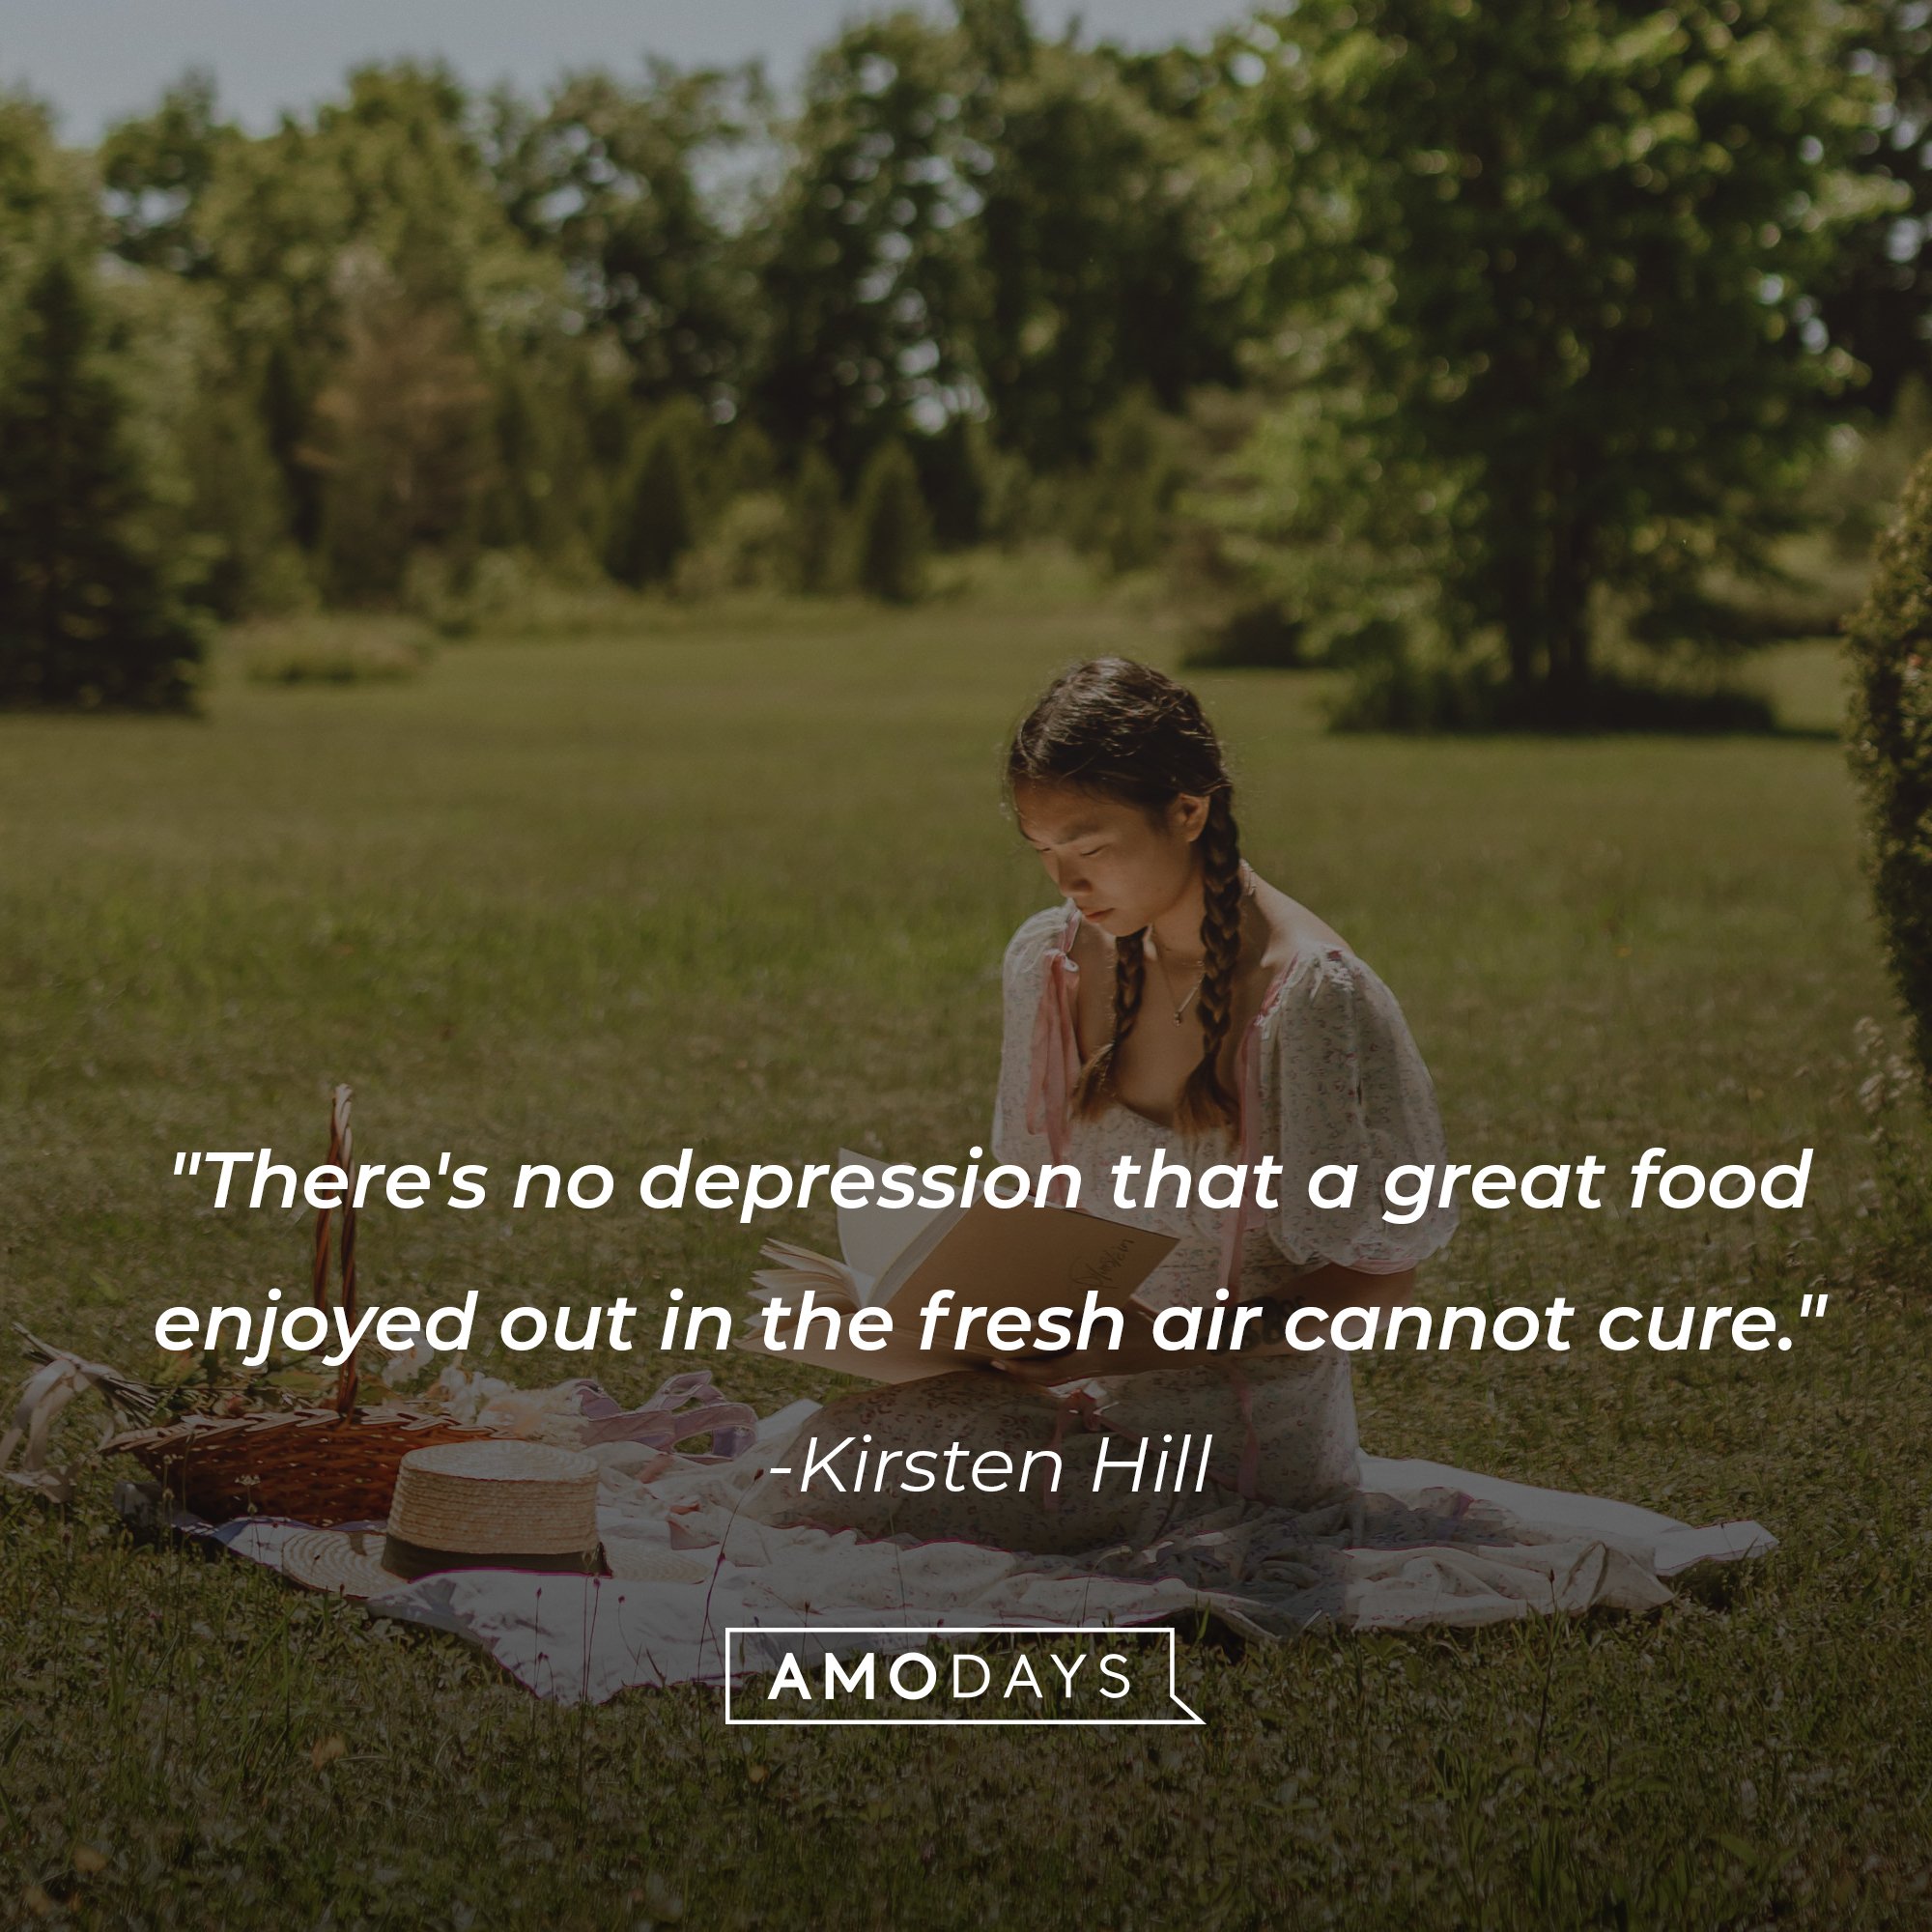 Kirsten Hill's quote: "There's no depression that a great food enjoyed out in the fresh air cannot cure." | Image: AmoDays